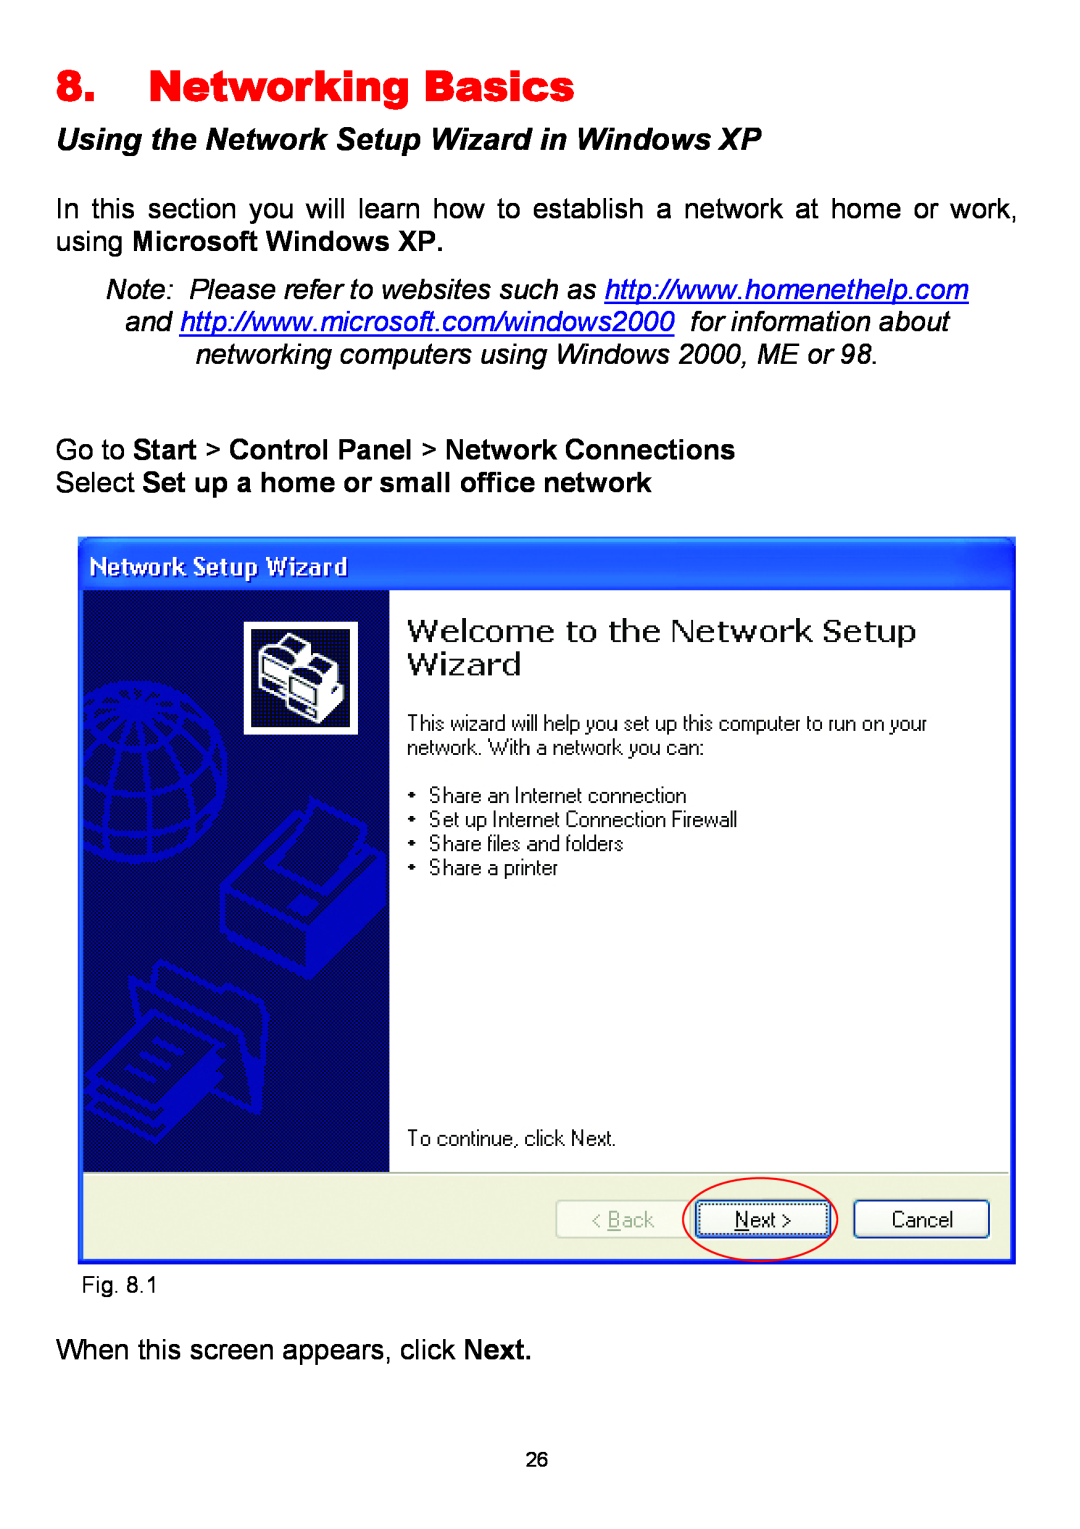 D-Link DWL-650+ manual Networking Basics, Using the Network Setup Wizard in Windows XP 